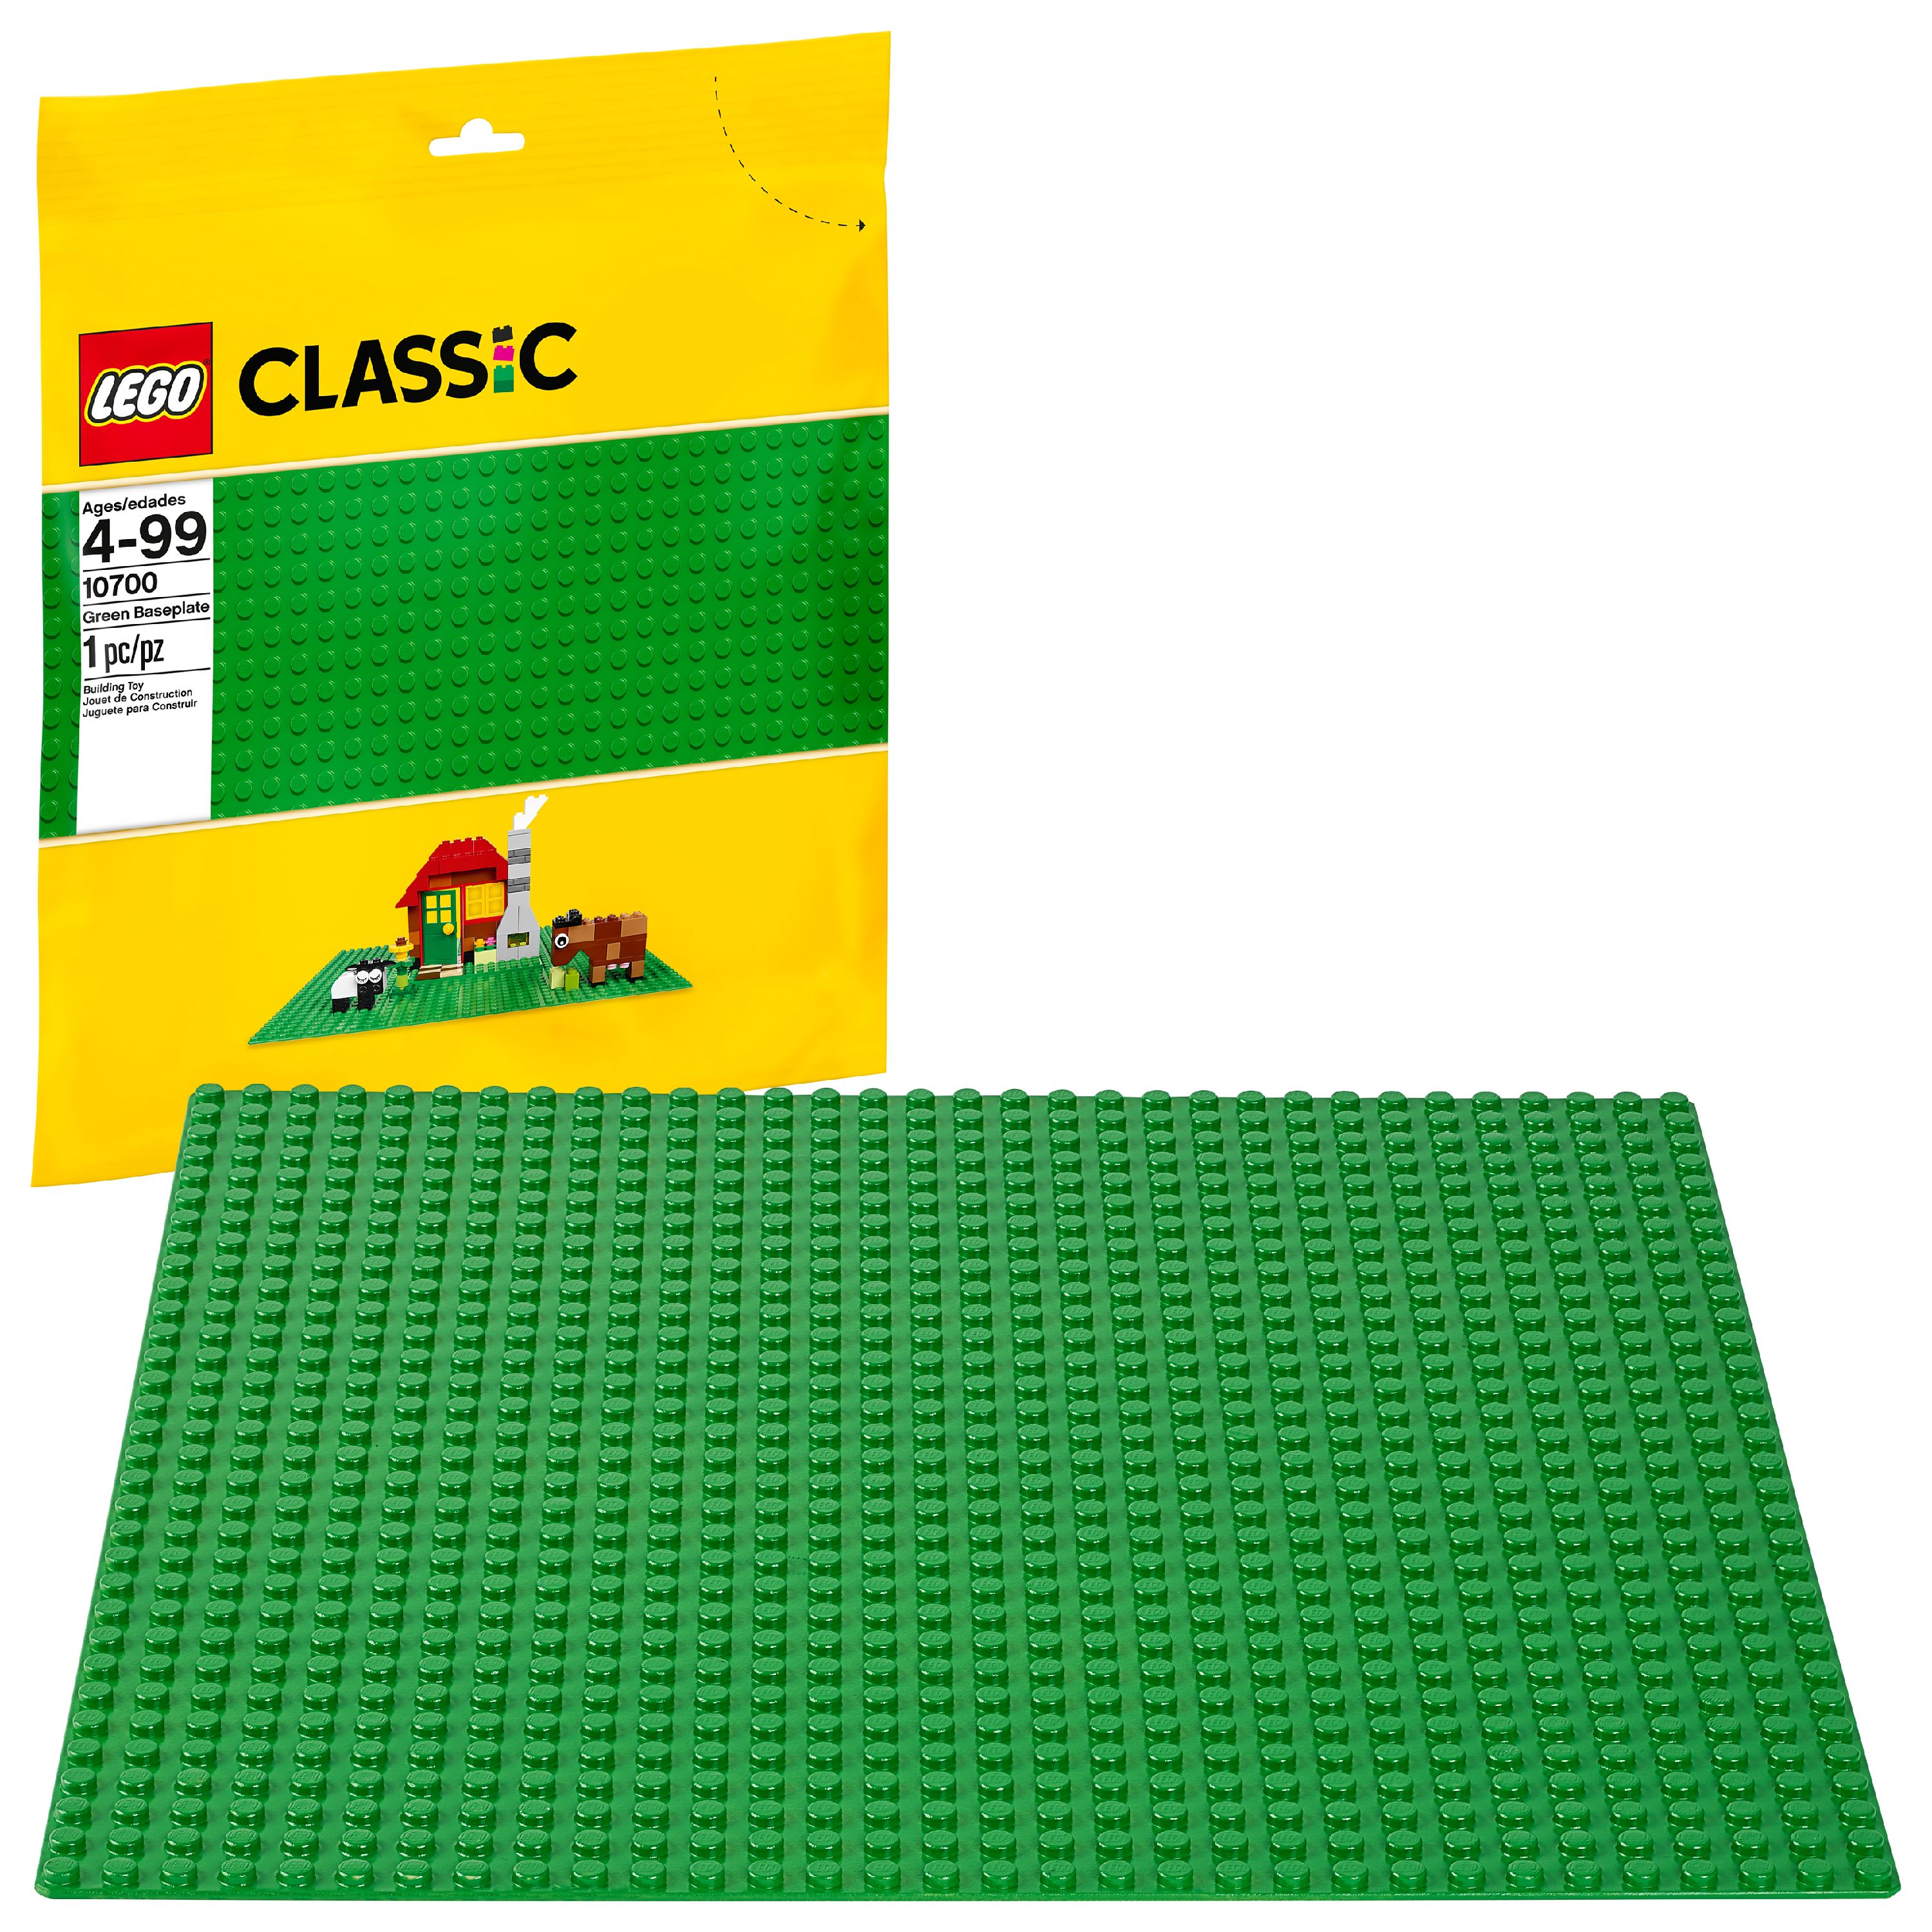 LEGO Classic Baseplate Only $4...